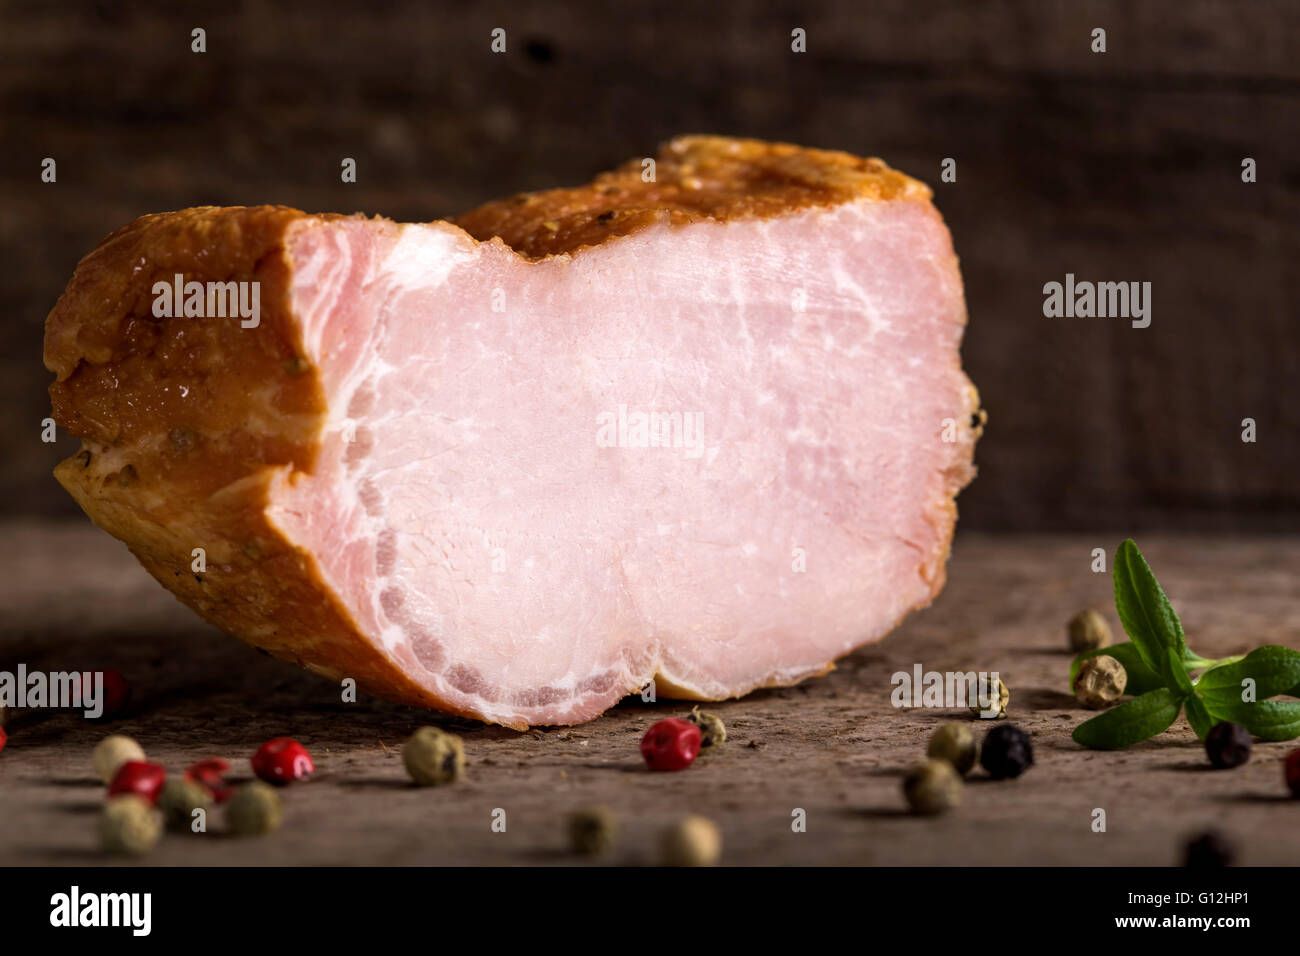 Smoked pork loin with spices over wooden background Stock Photo